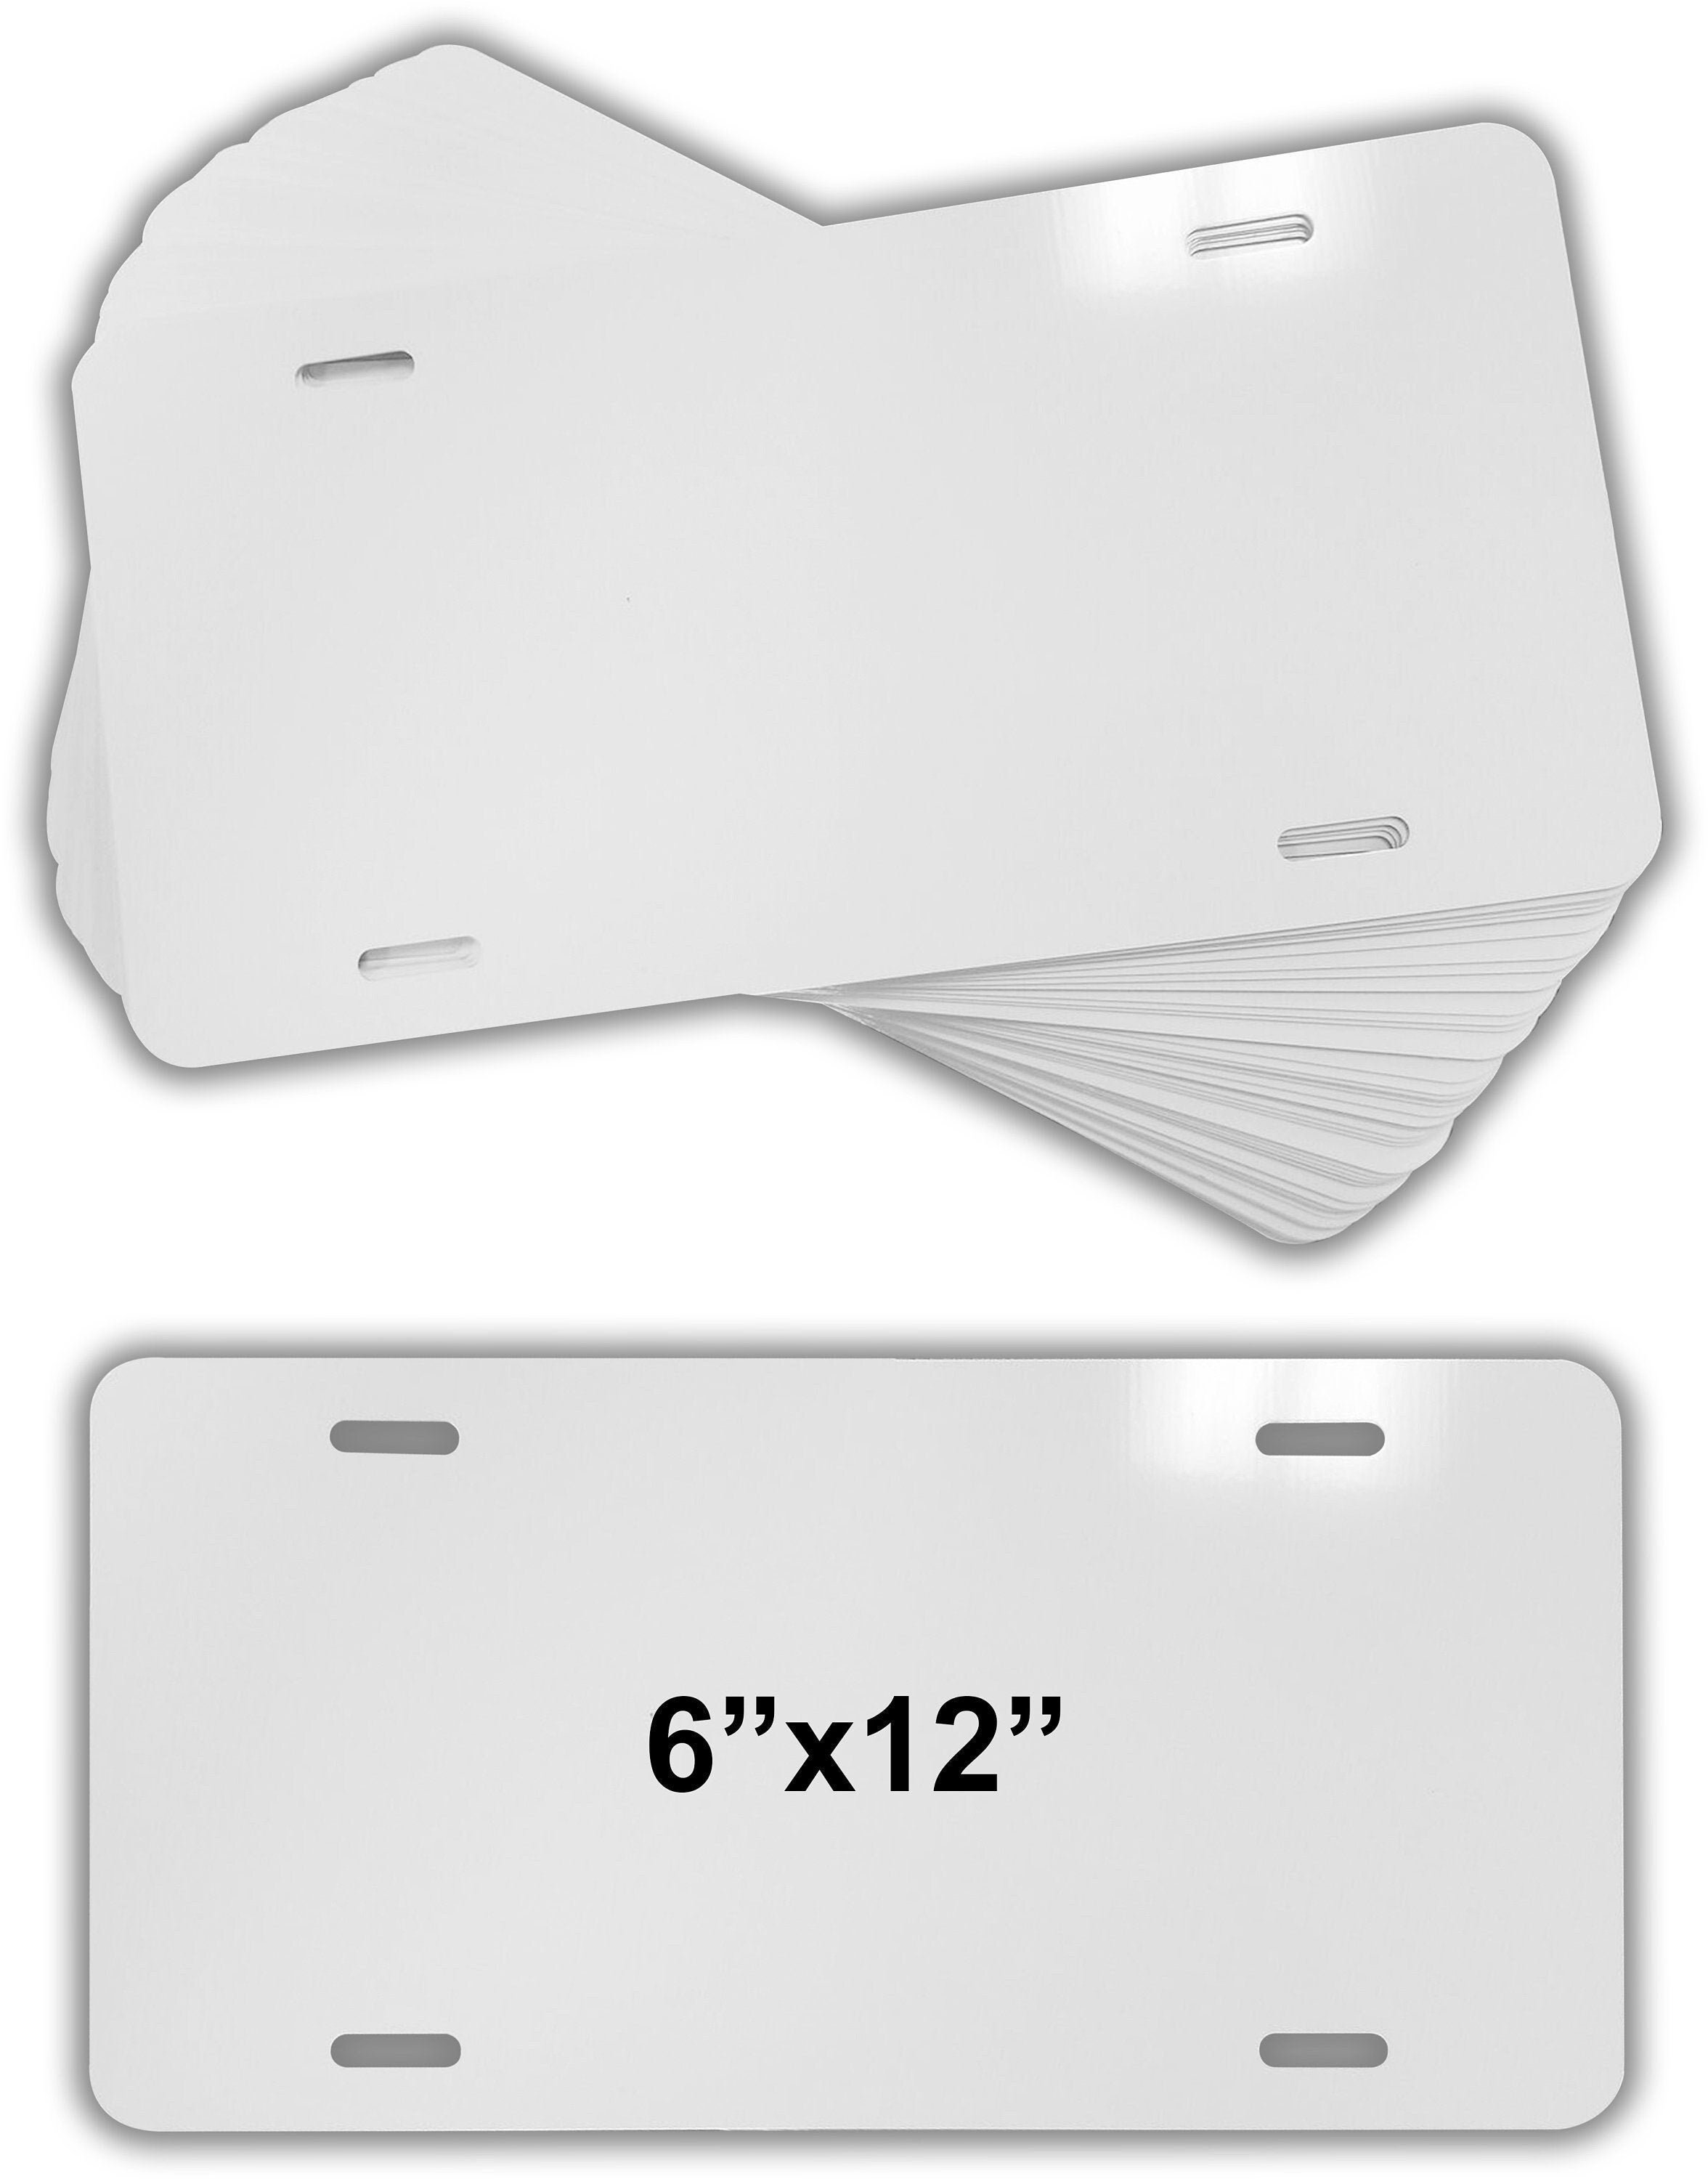 DIY Sublimation Clipboard Blanks Aluminum Board License Plate Painting Card  For Bikes, Cars, Clubs, And Ornaments White, 1mm Diameter From  Agoodhope_cups, $1.29